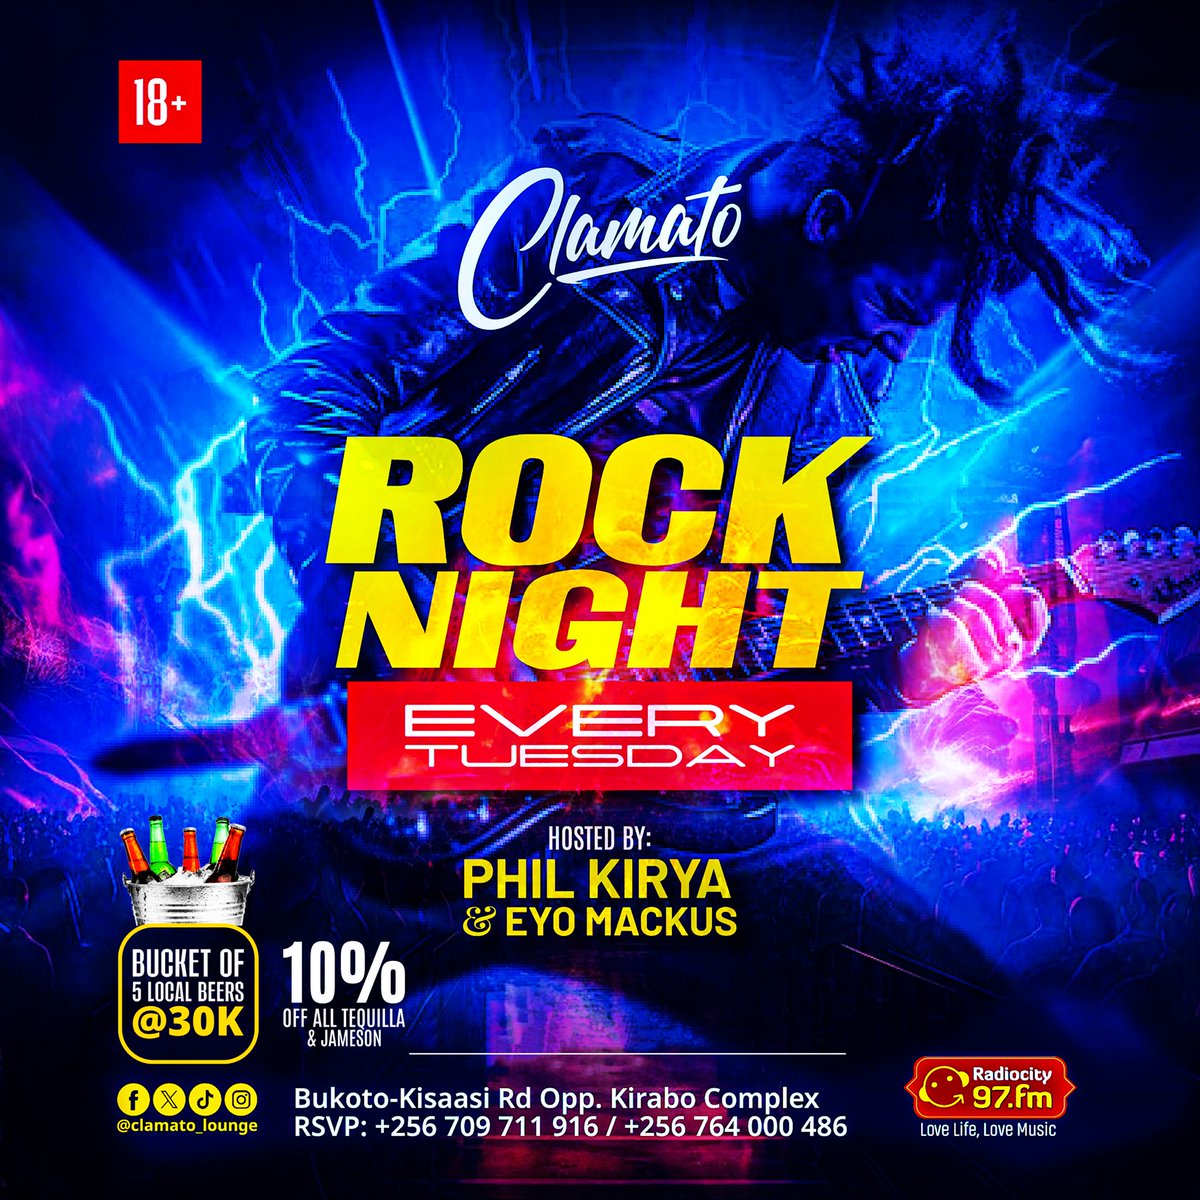 The rock nights at @clamato_lounge have been made more fun. They have introduced a bucket of 5 local beers at only 30k.
So see you tomorrow my people.
#ClamatoRockTuesdays hosted by @PhilKirya and Eyo Mackus.